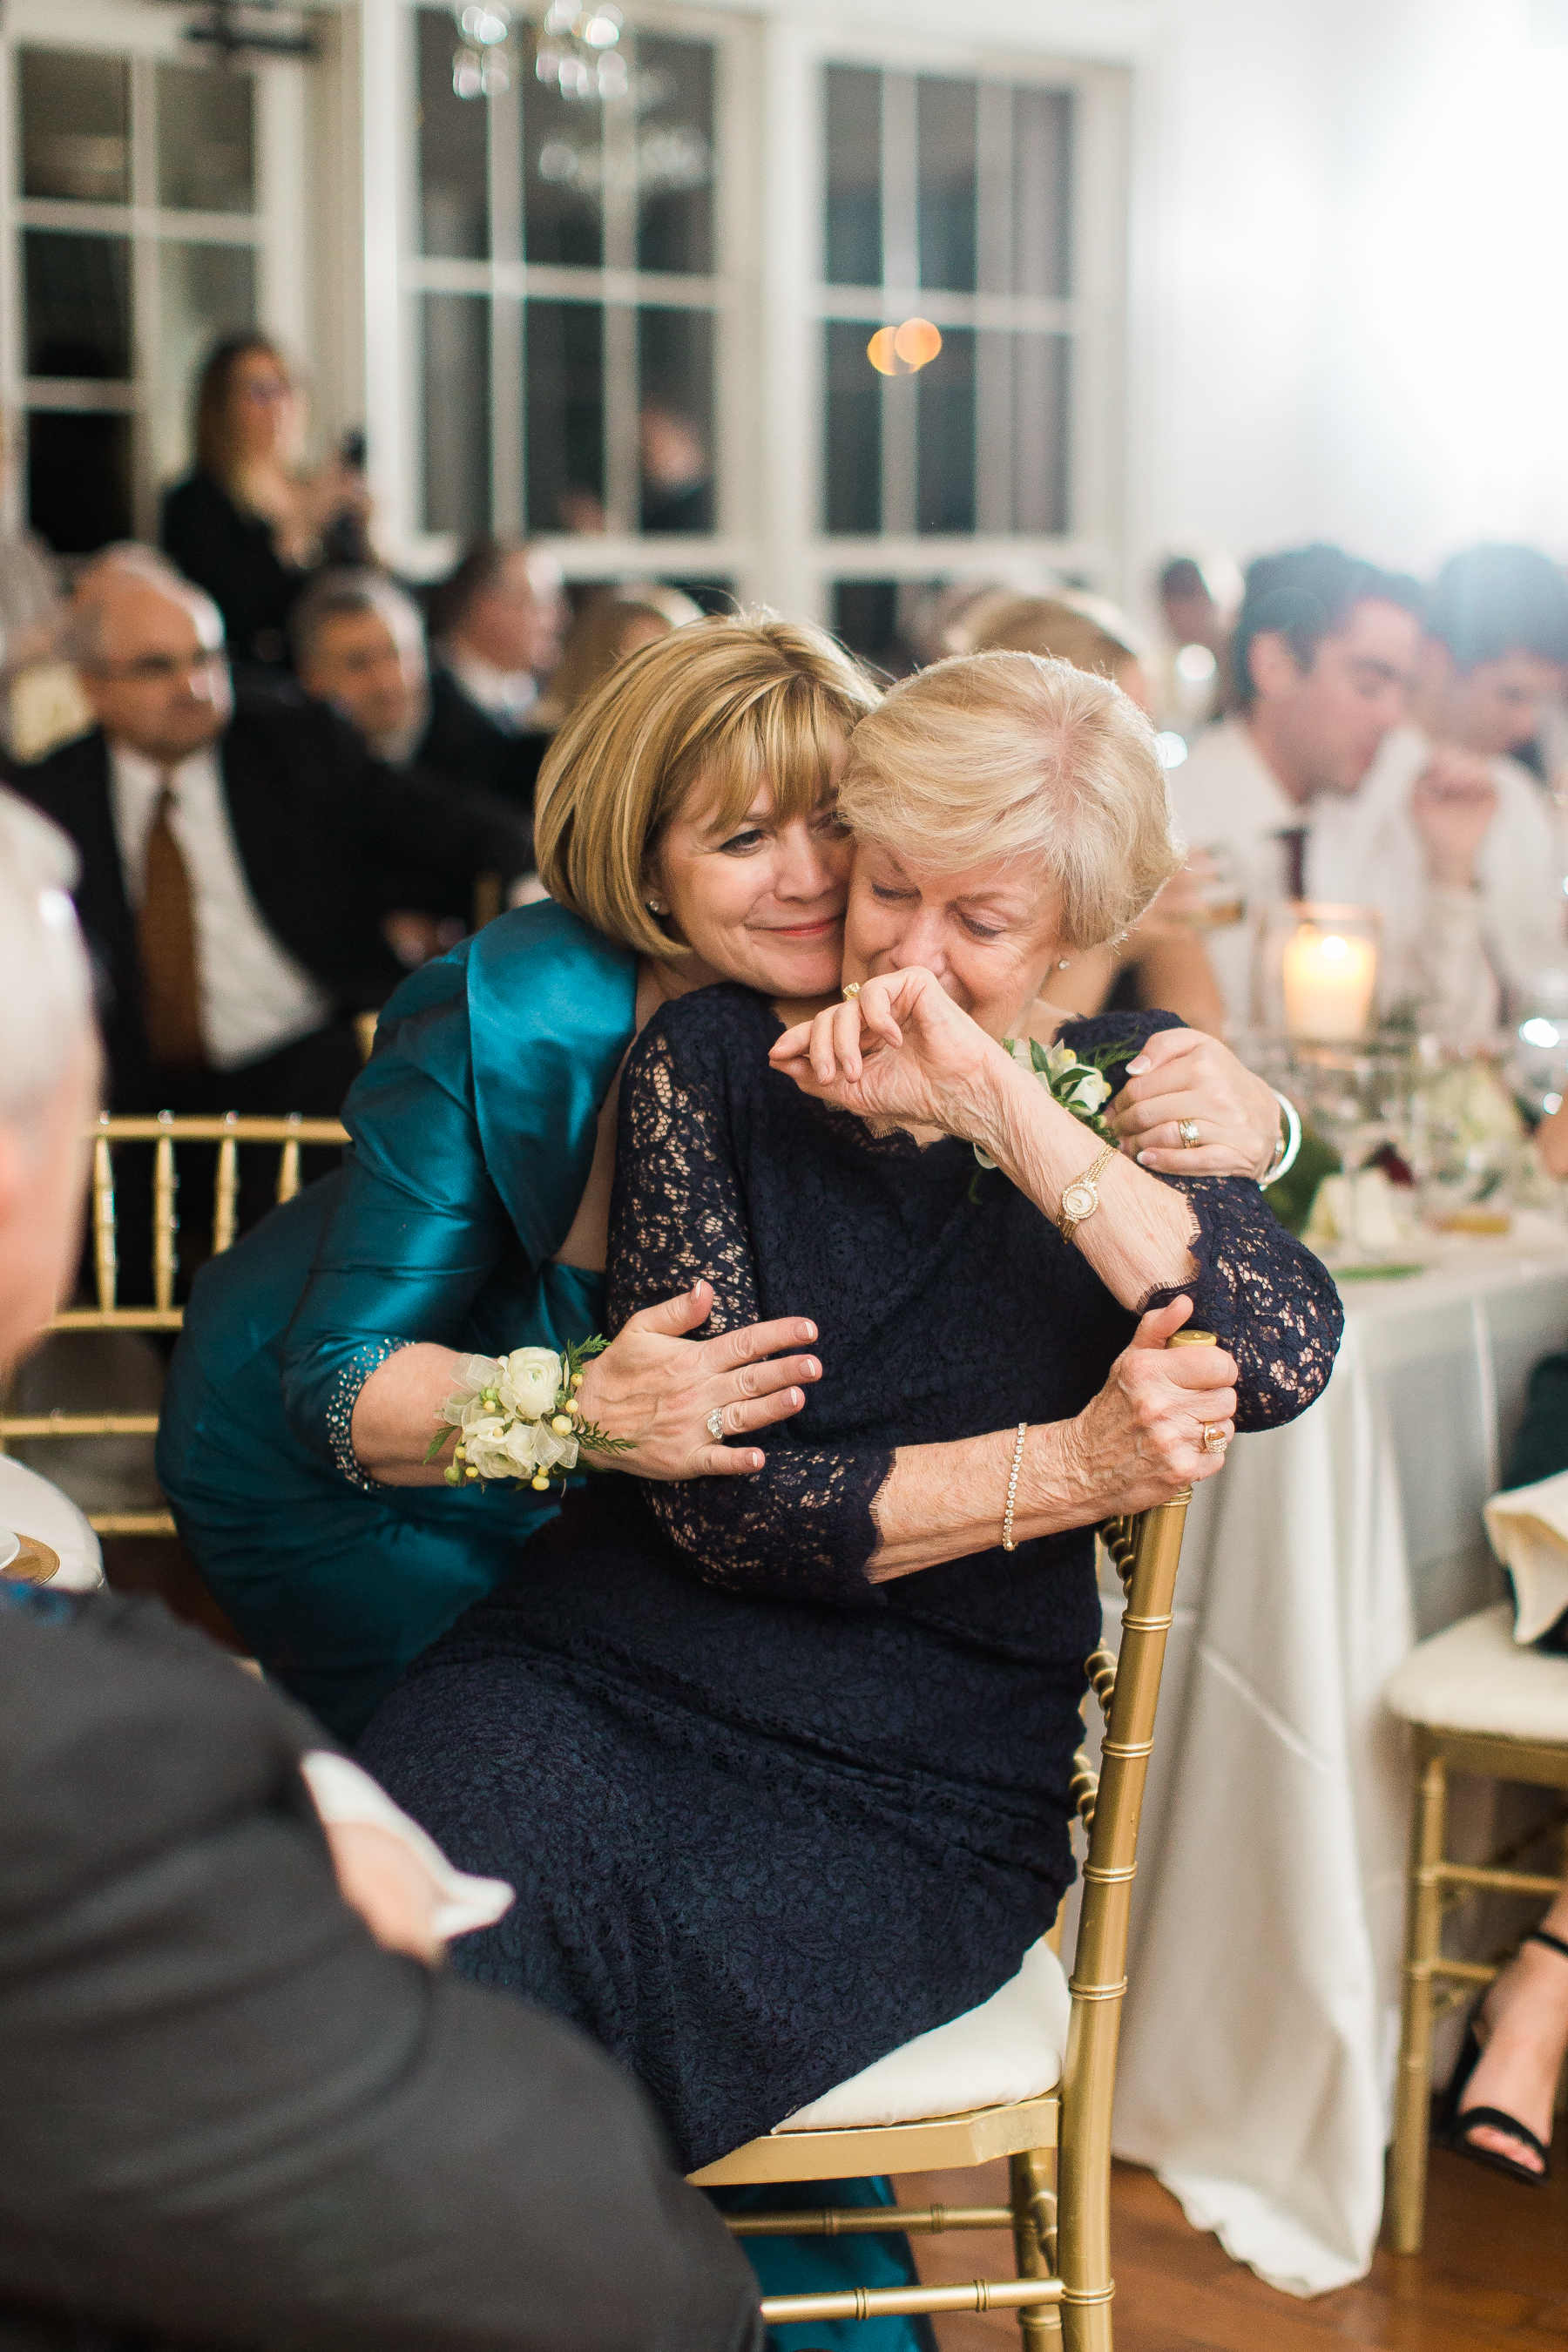 Mother and grandmother get emotional during wedding toasts.